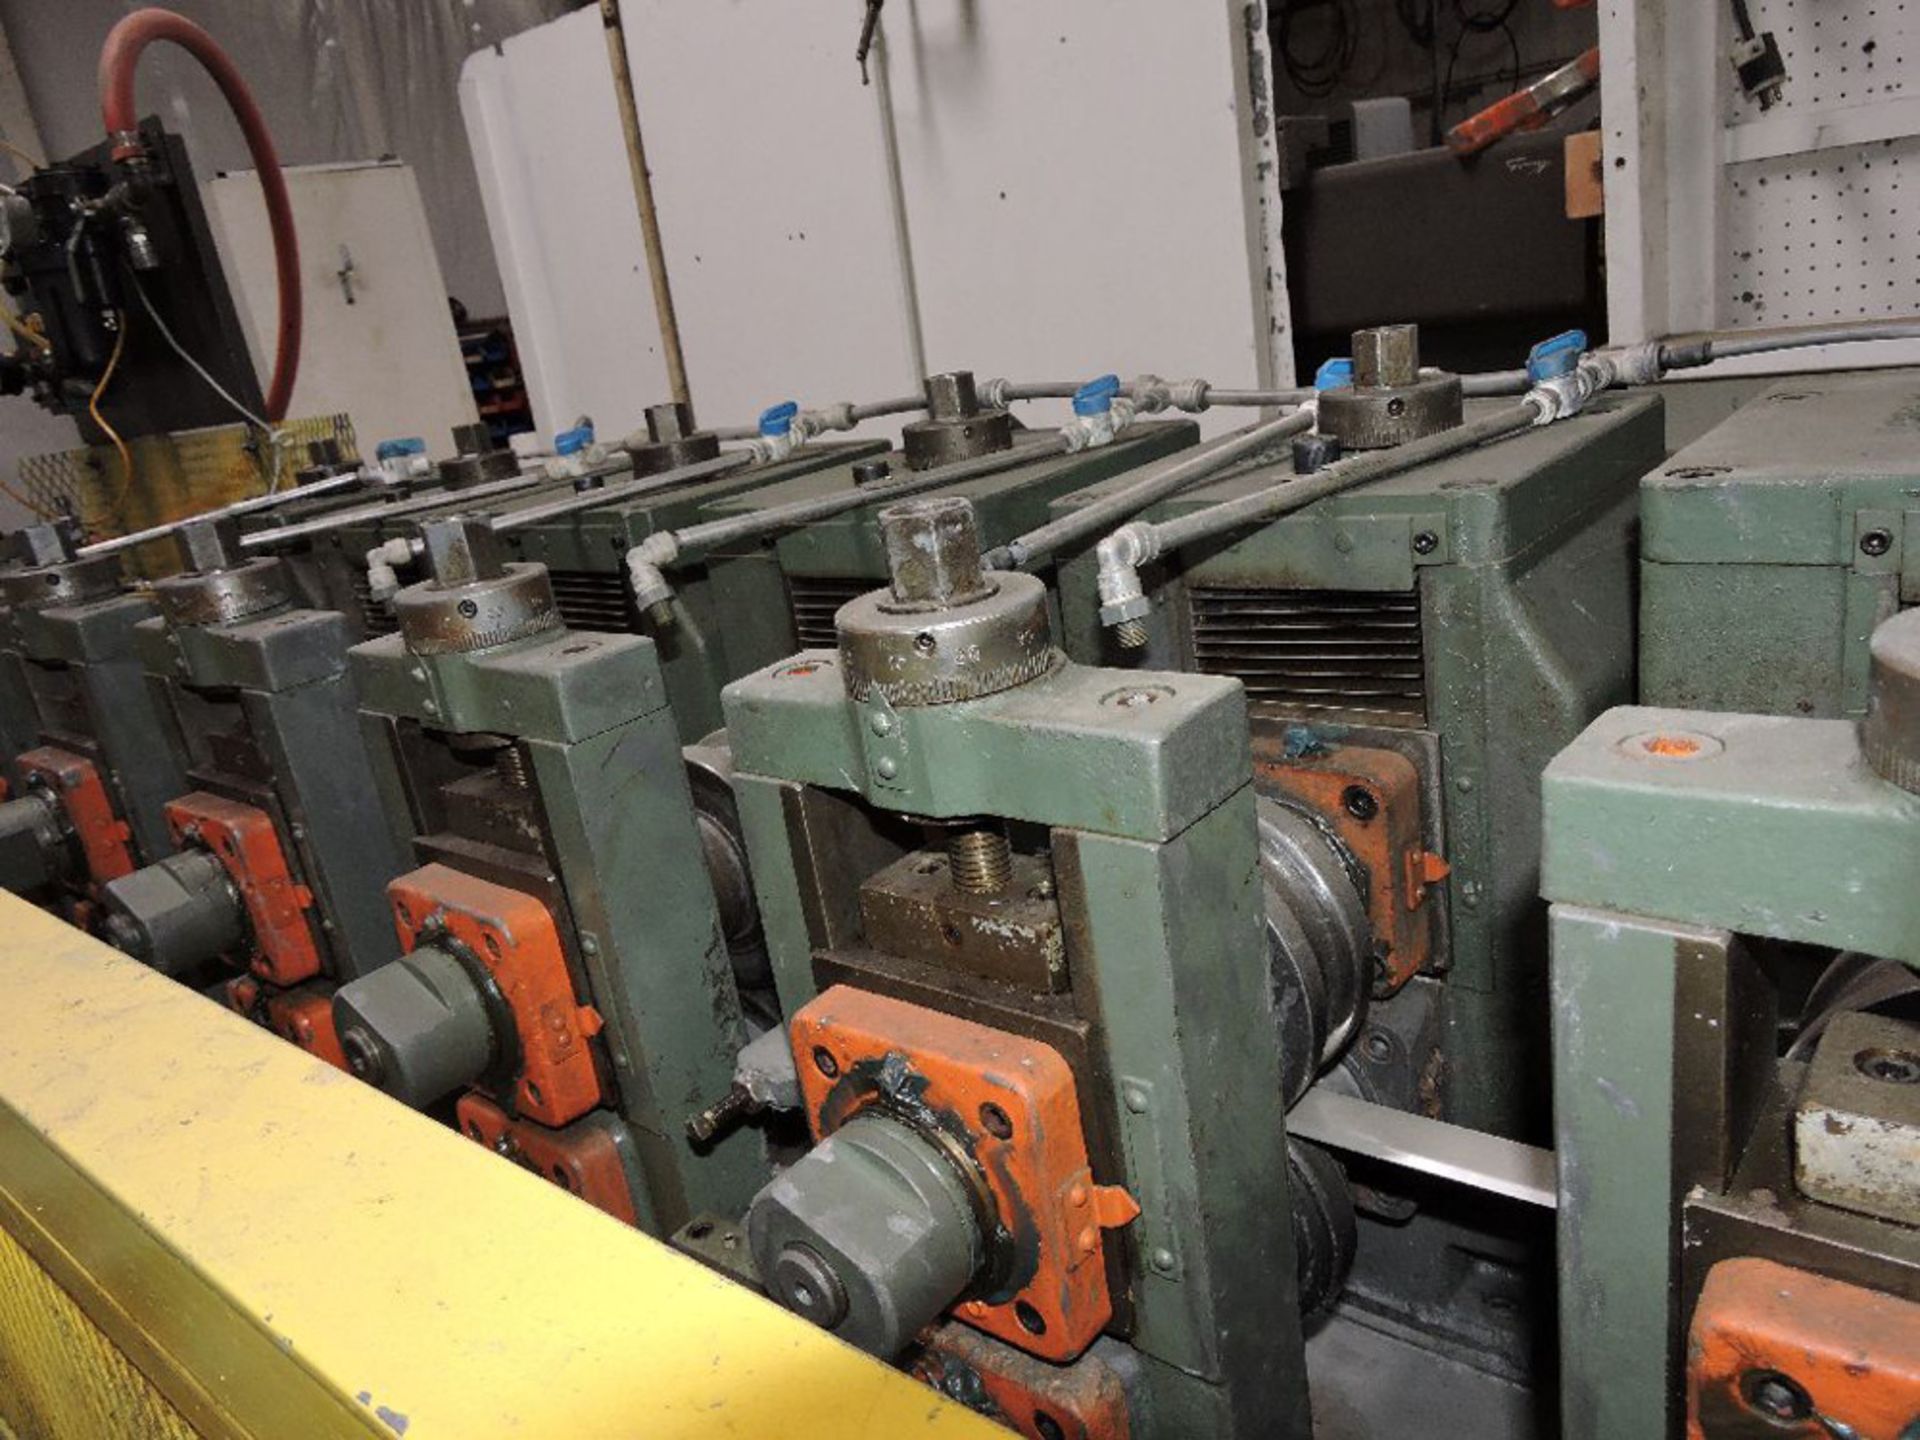 Ardcor Geared Rollformer, 6 Stands x 5 1/2" RS x 1 1/2" Shaft, Mdl: 5-F - Painesville, OH - 7540P - Image 4 of 10